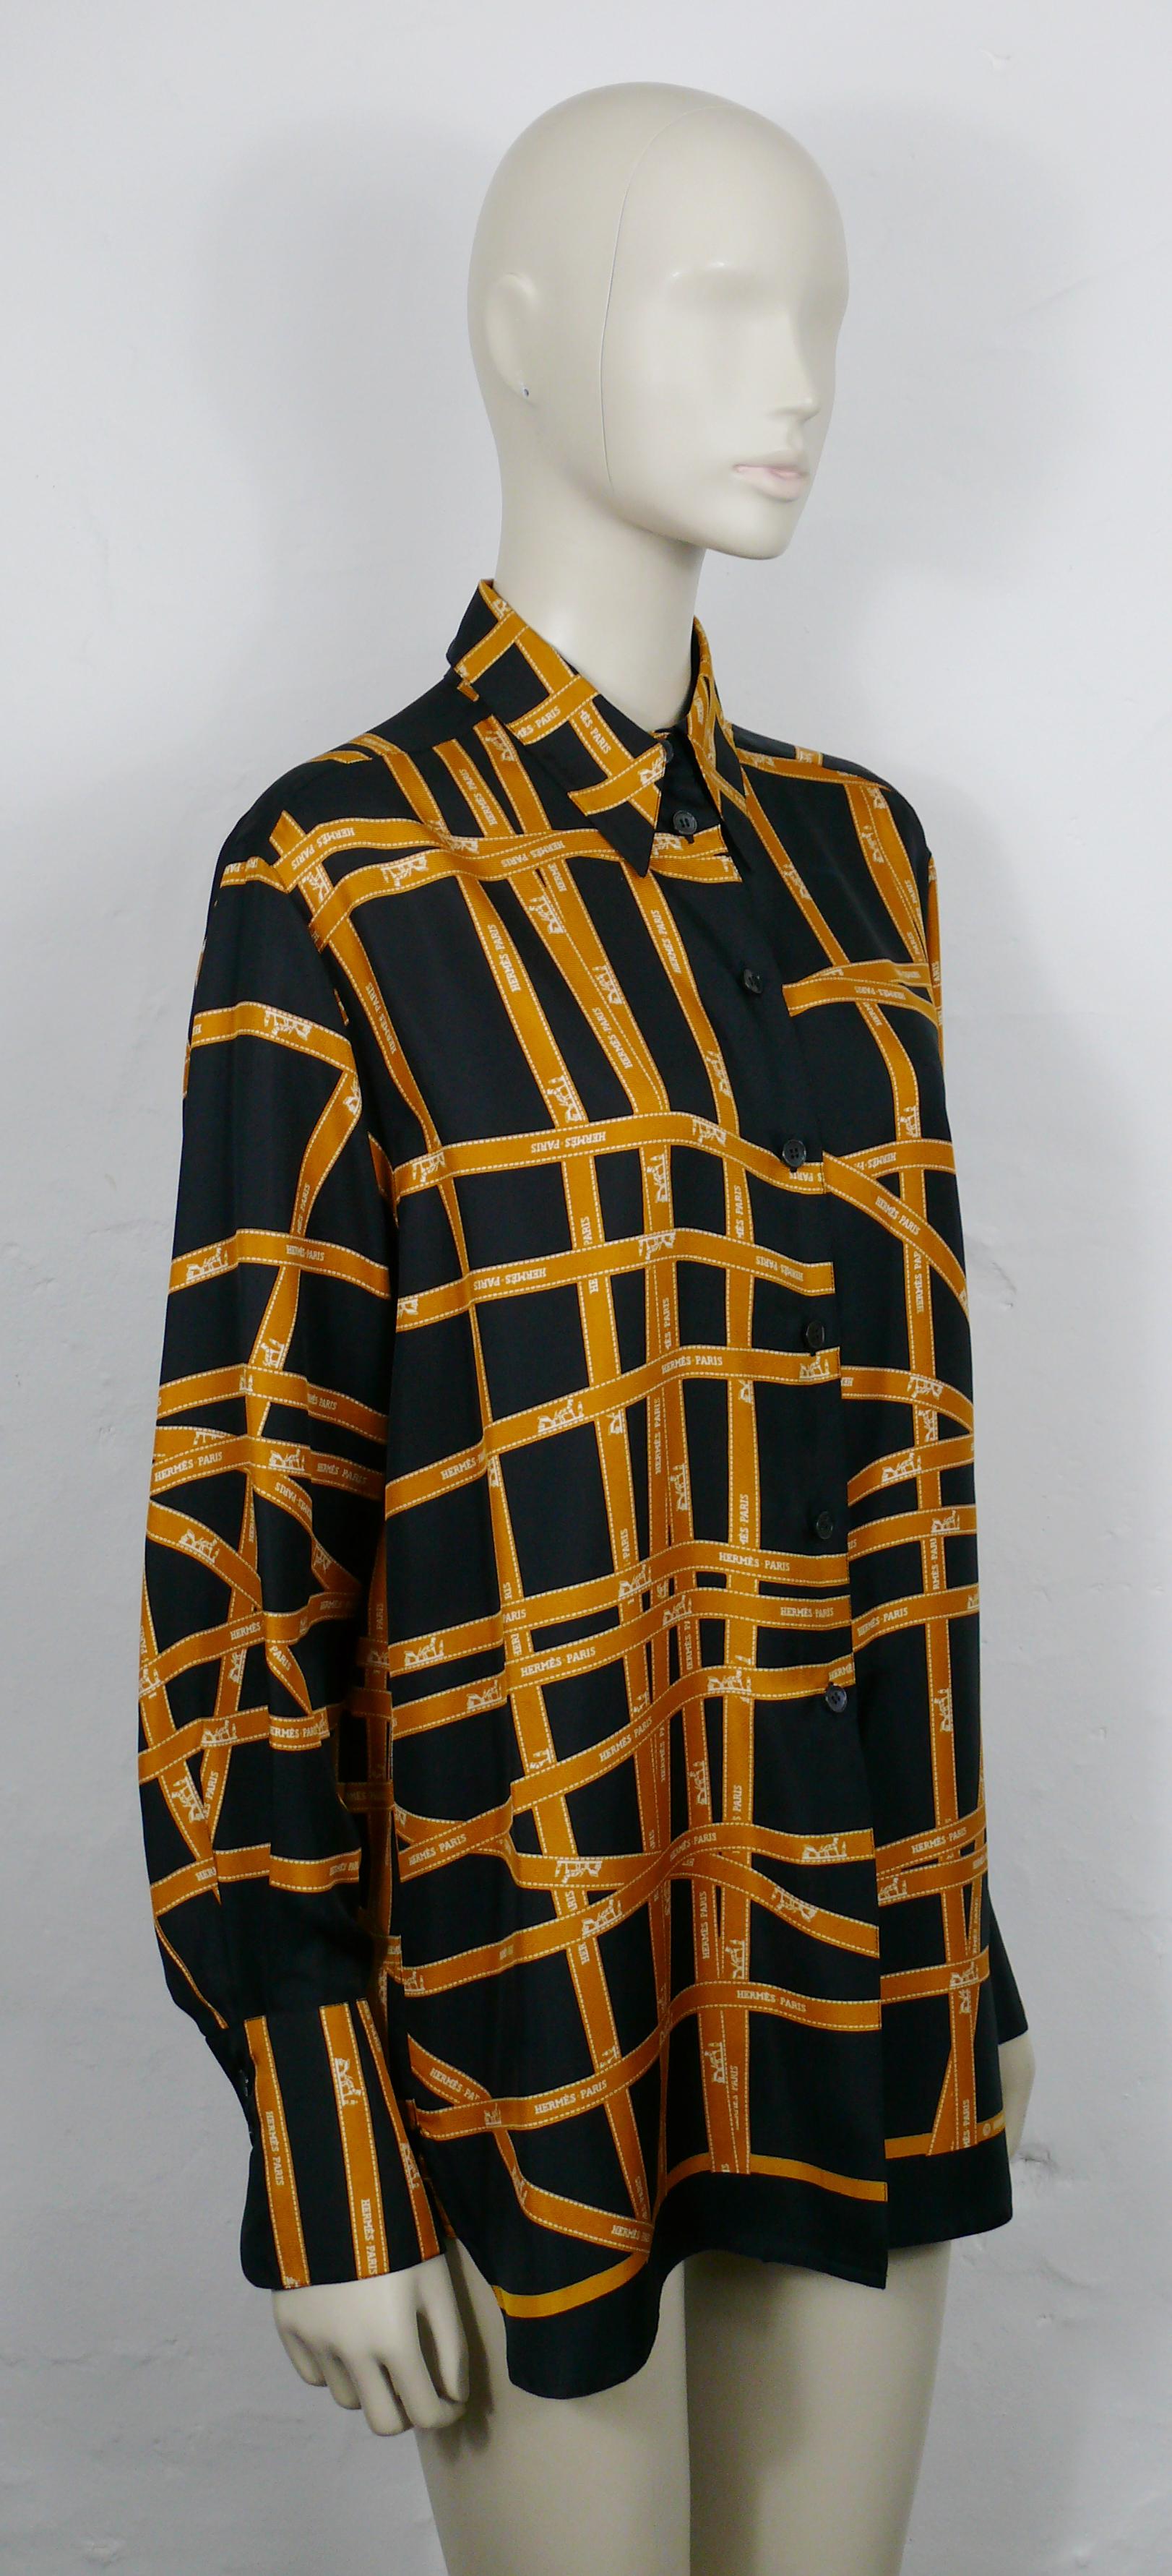 HERMES Paris vintage iconic Bolduc print silk shirt blouse.

This shirt features :
- Orange HERMES PARIS Bolduc print featuring white carriages and stitching on a black background.
- Long sleeves.
- Front button down closure
- 2 buttons on each